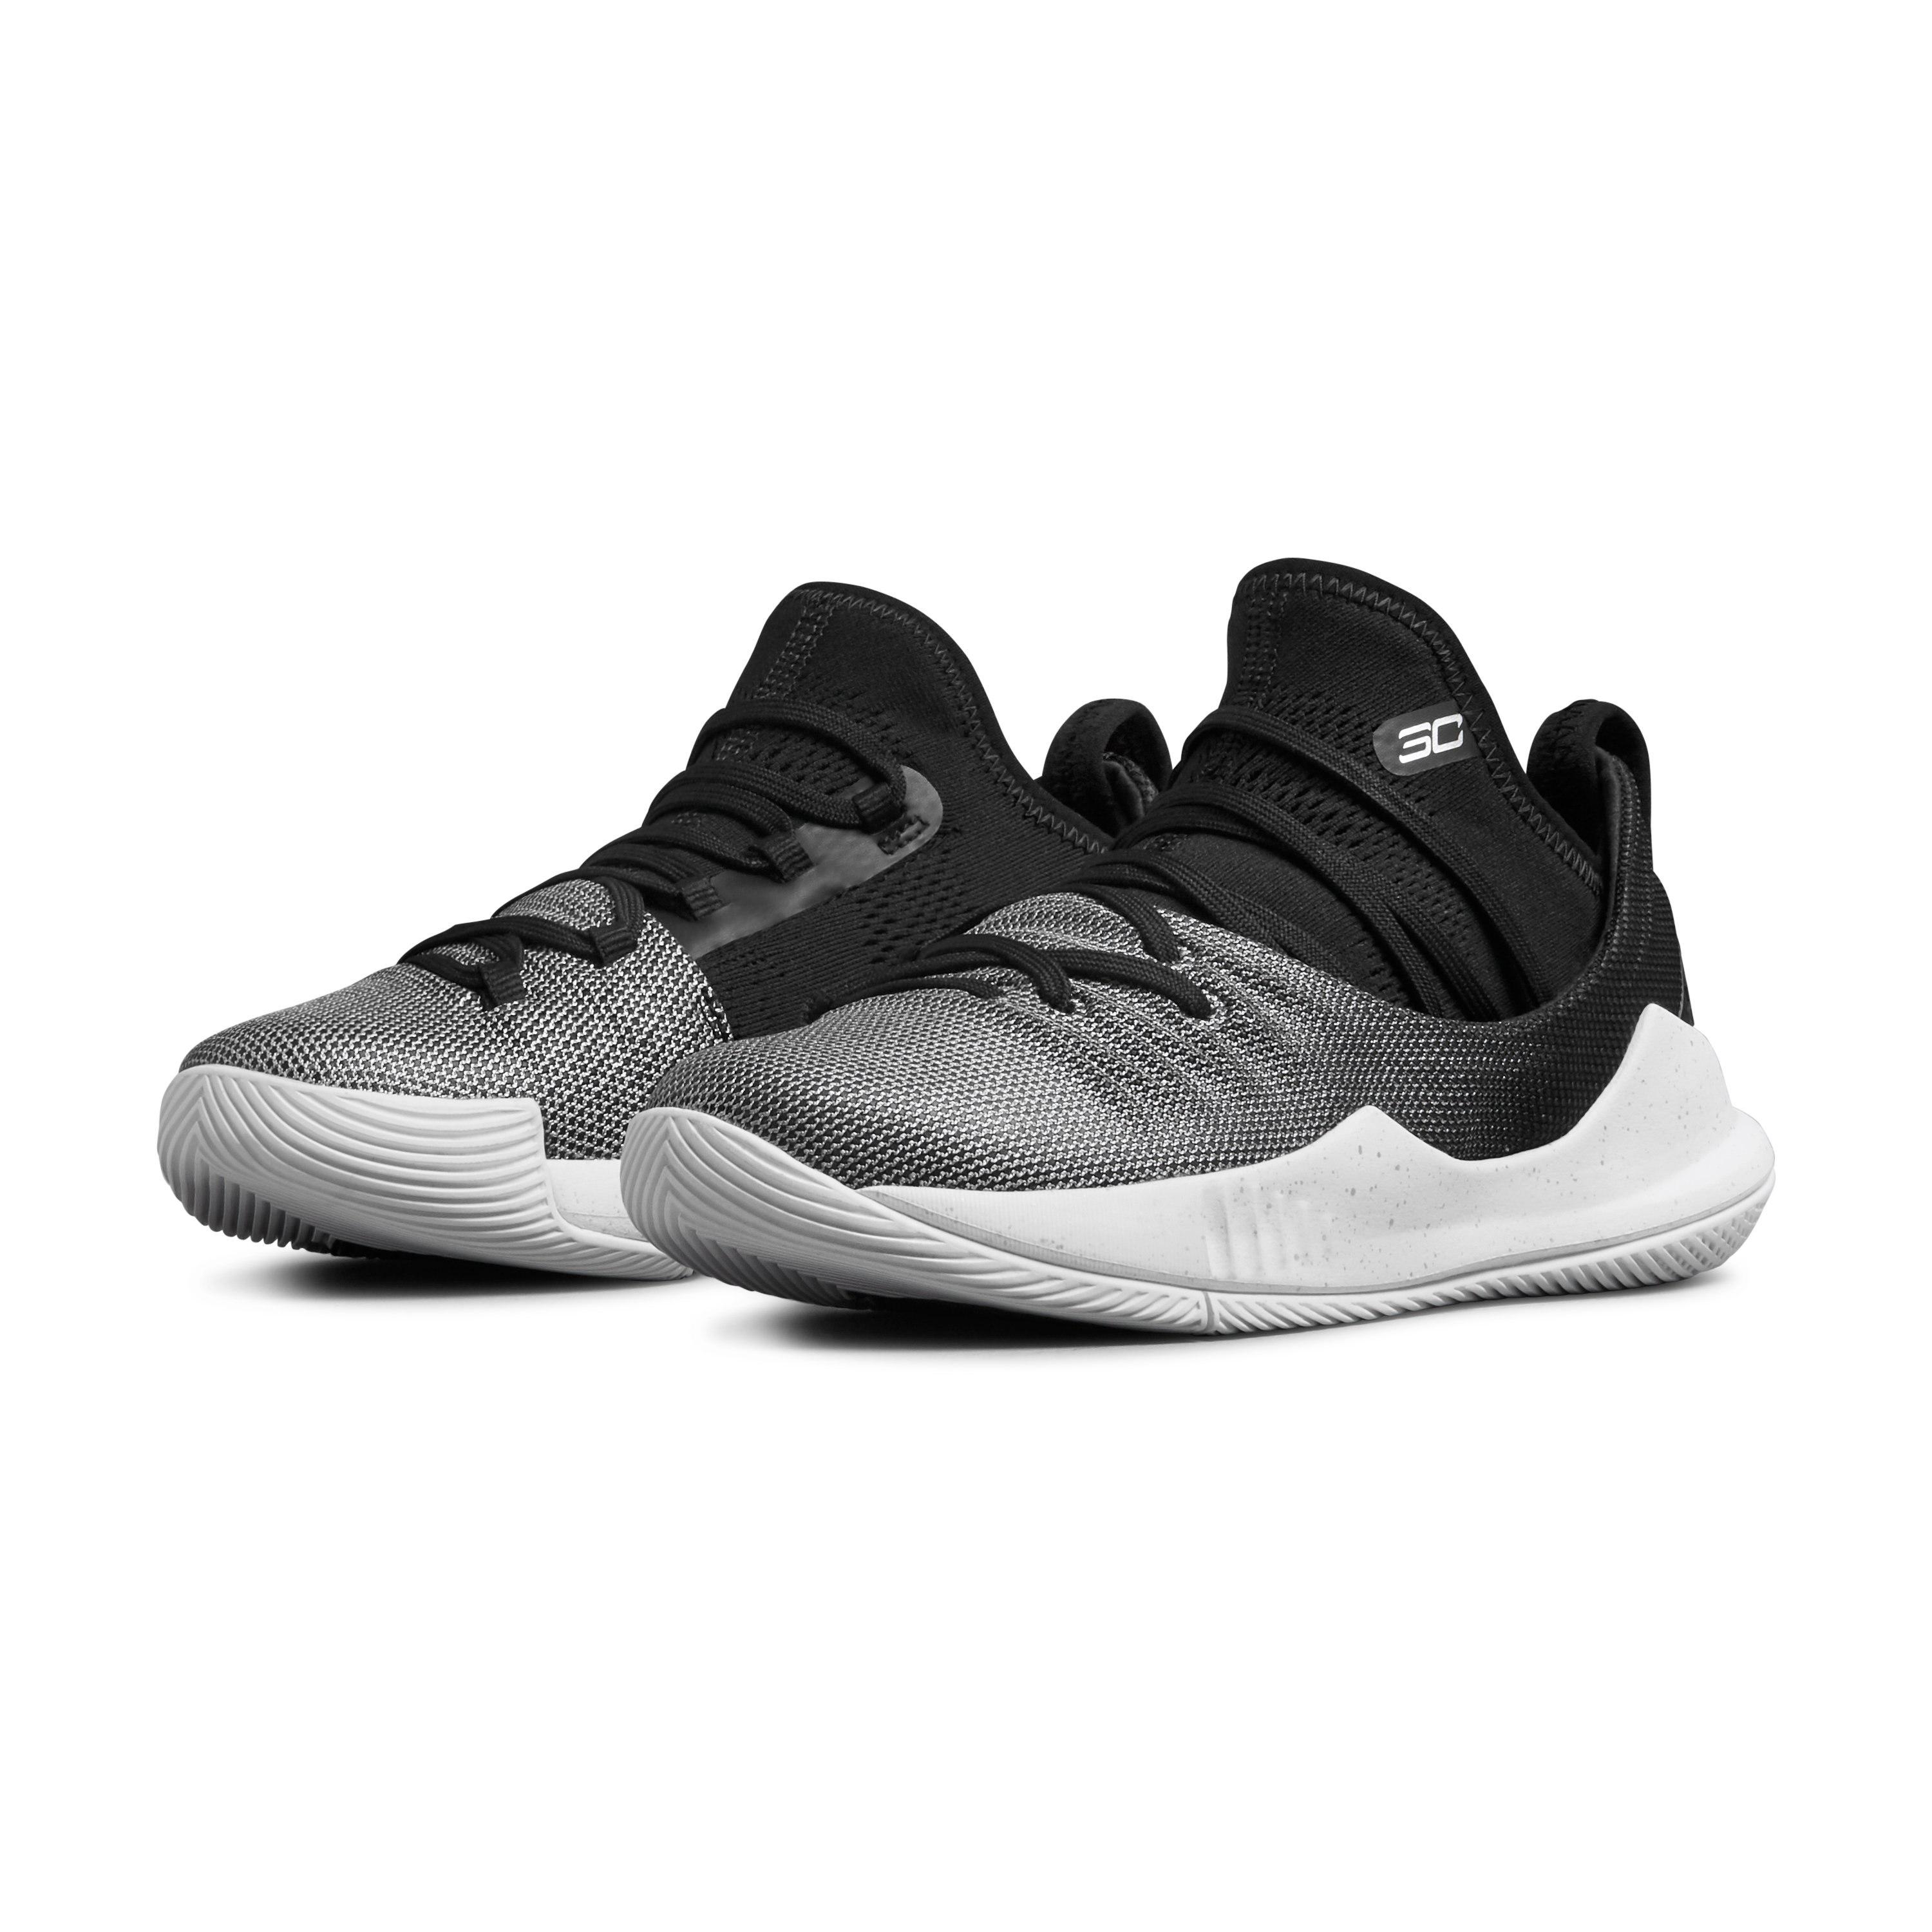 Under Armour Curry 5 Basketball Shoes 